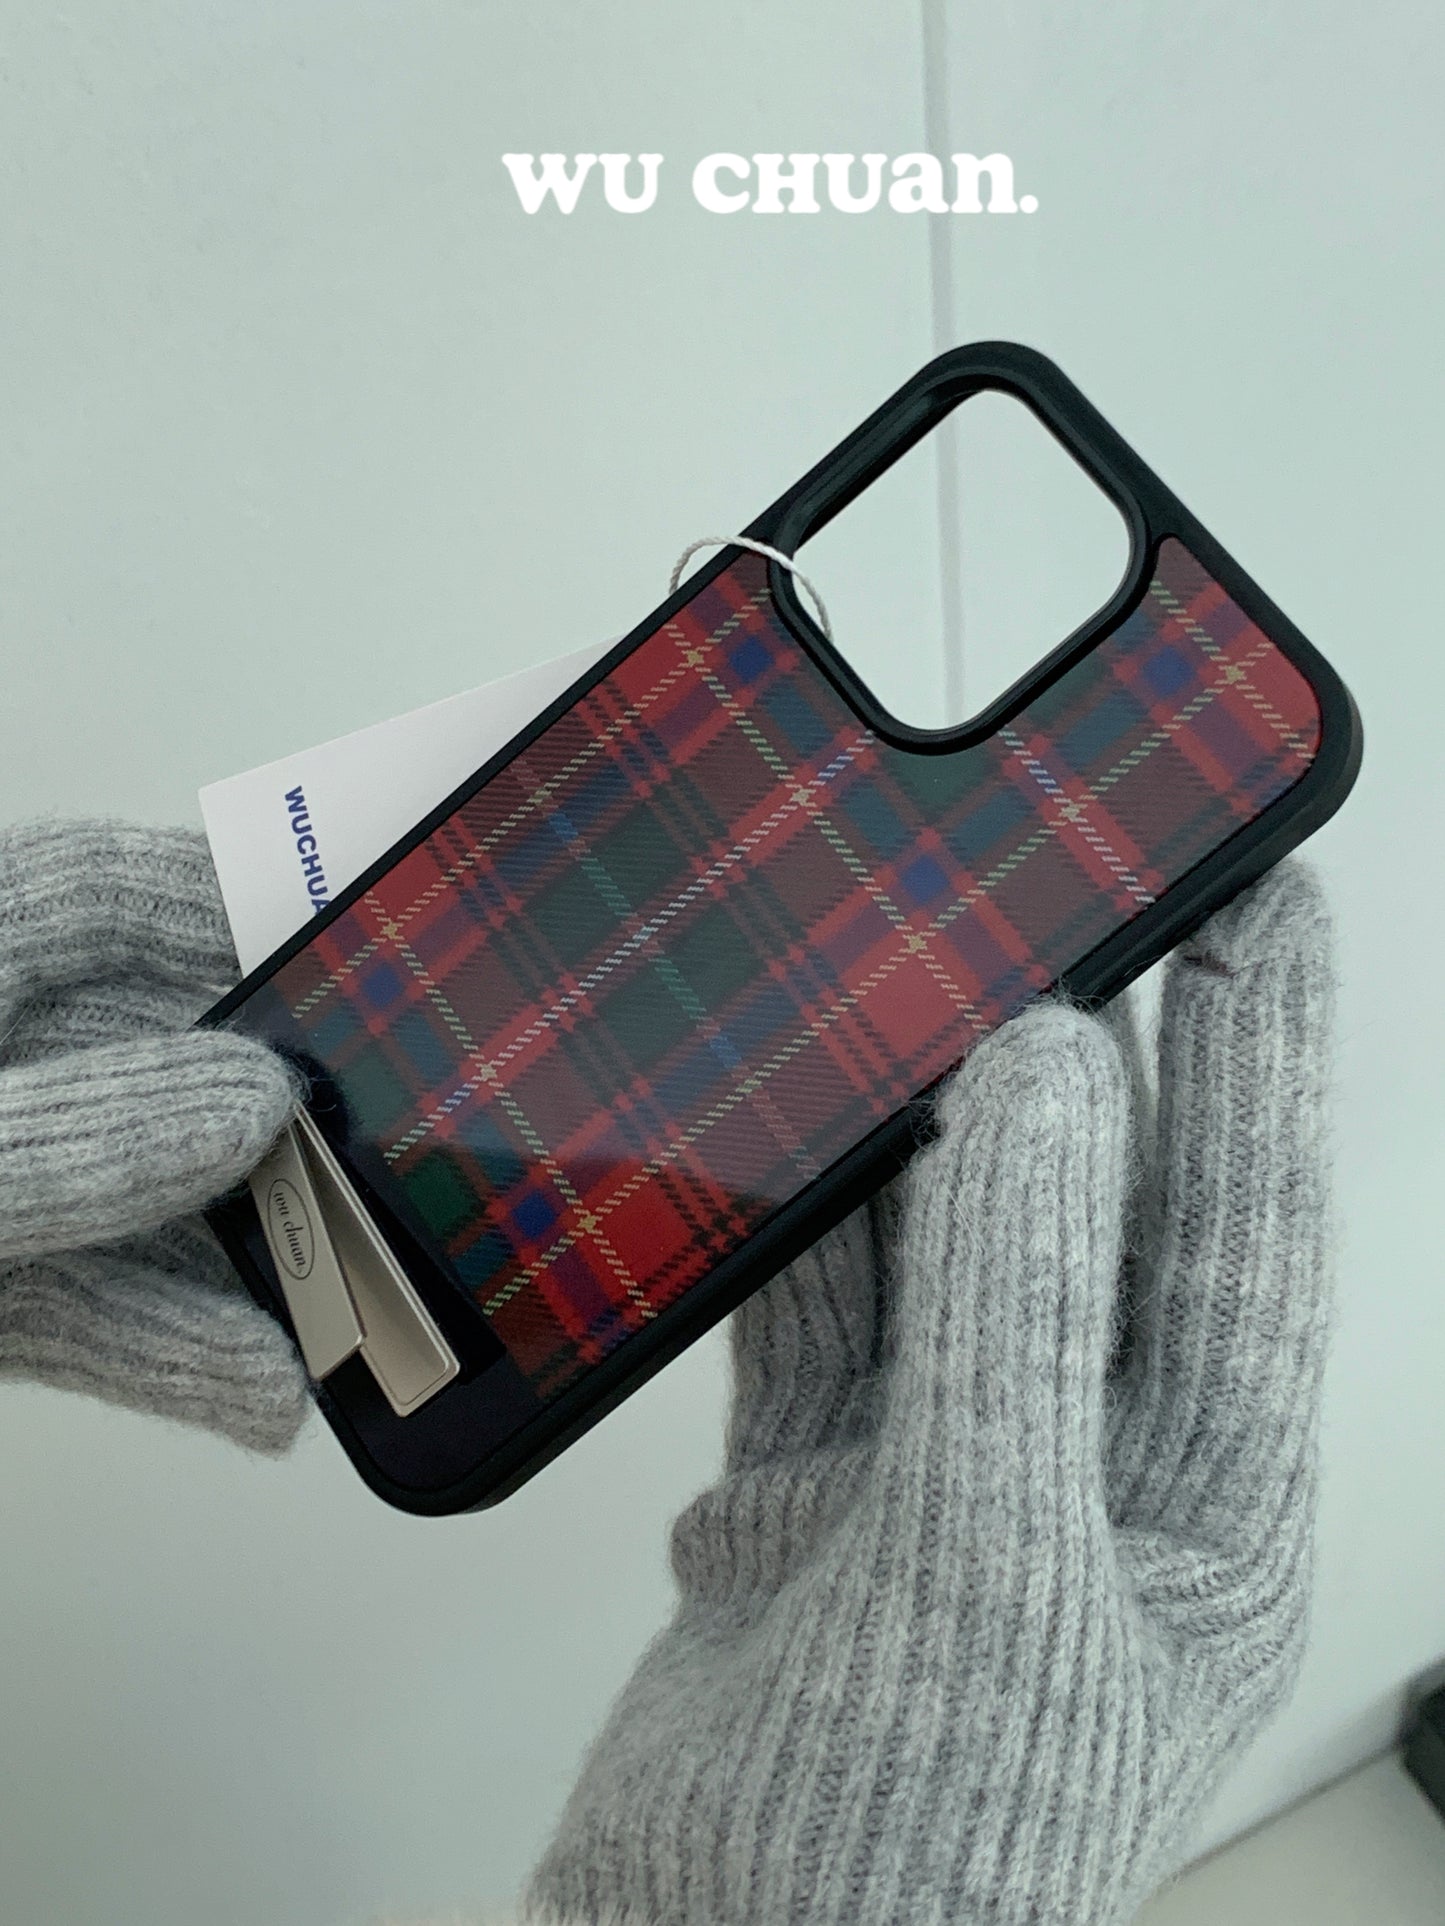 Red Plaid Phone Case with Stand